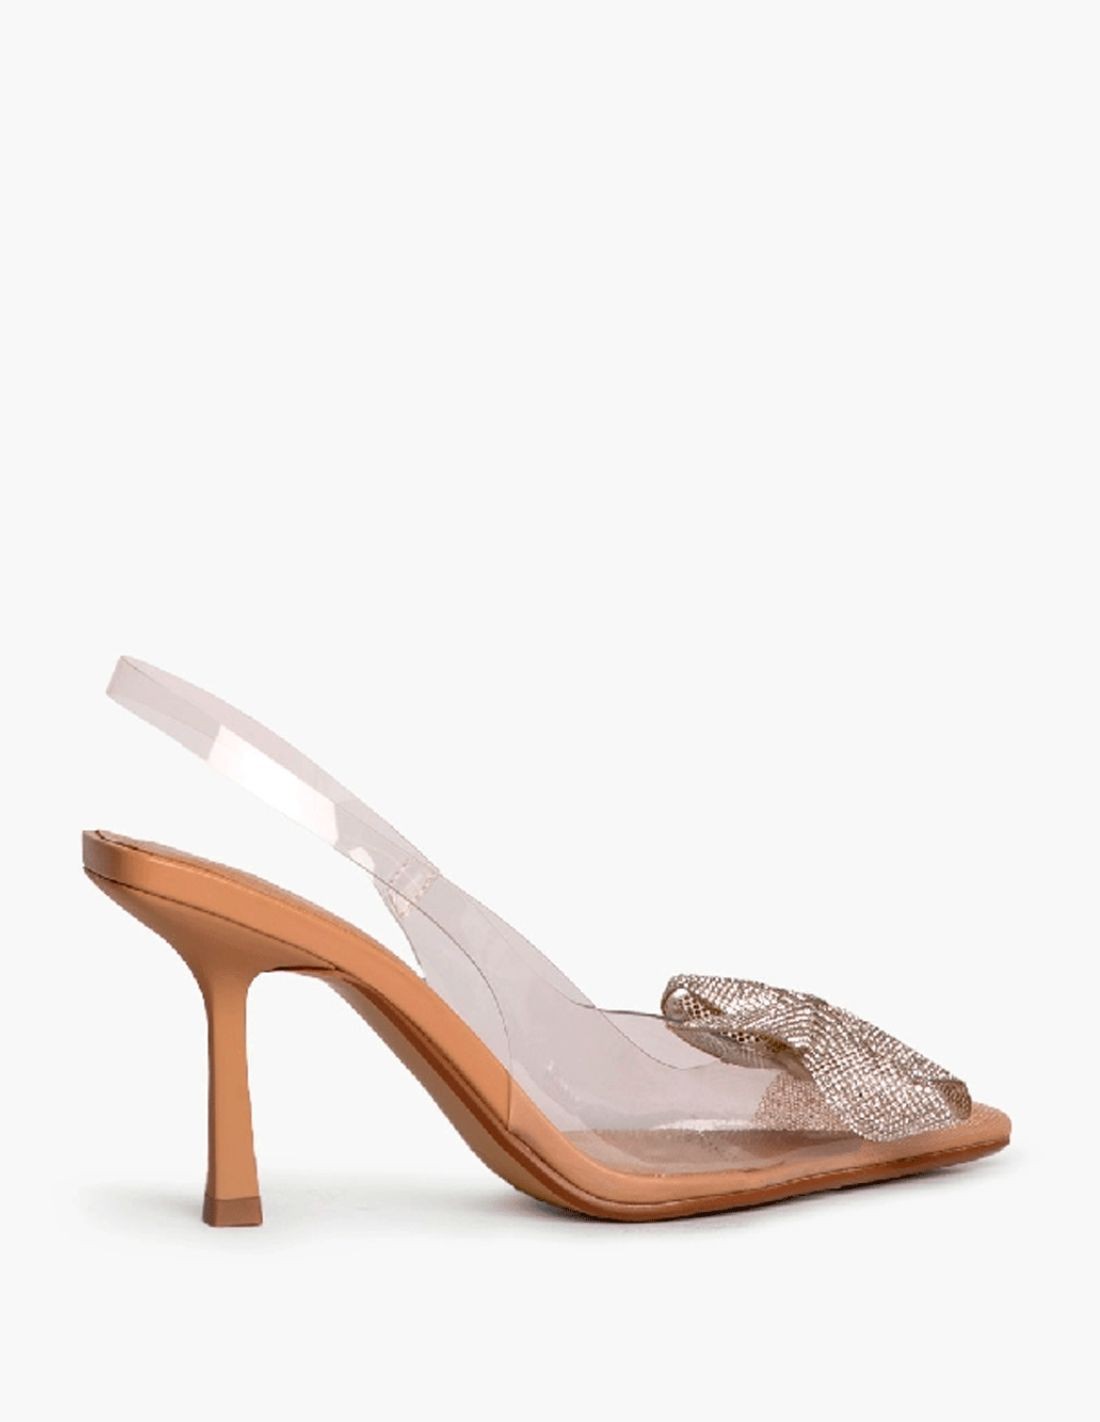 Women's Clear Heels | Explore our New Arrivals | ZARA United States